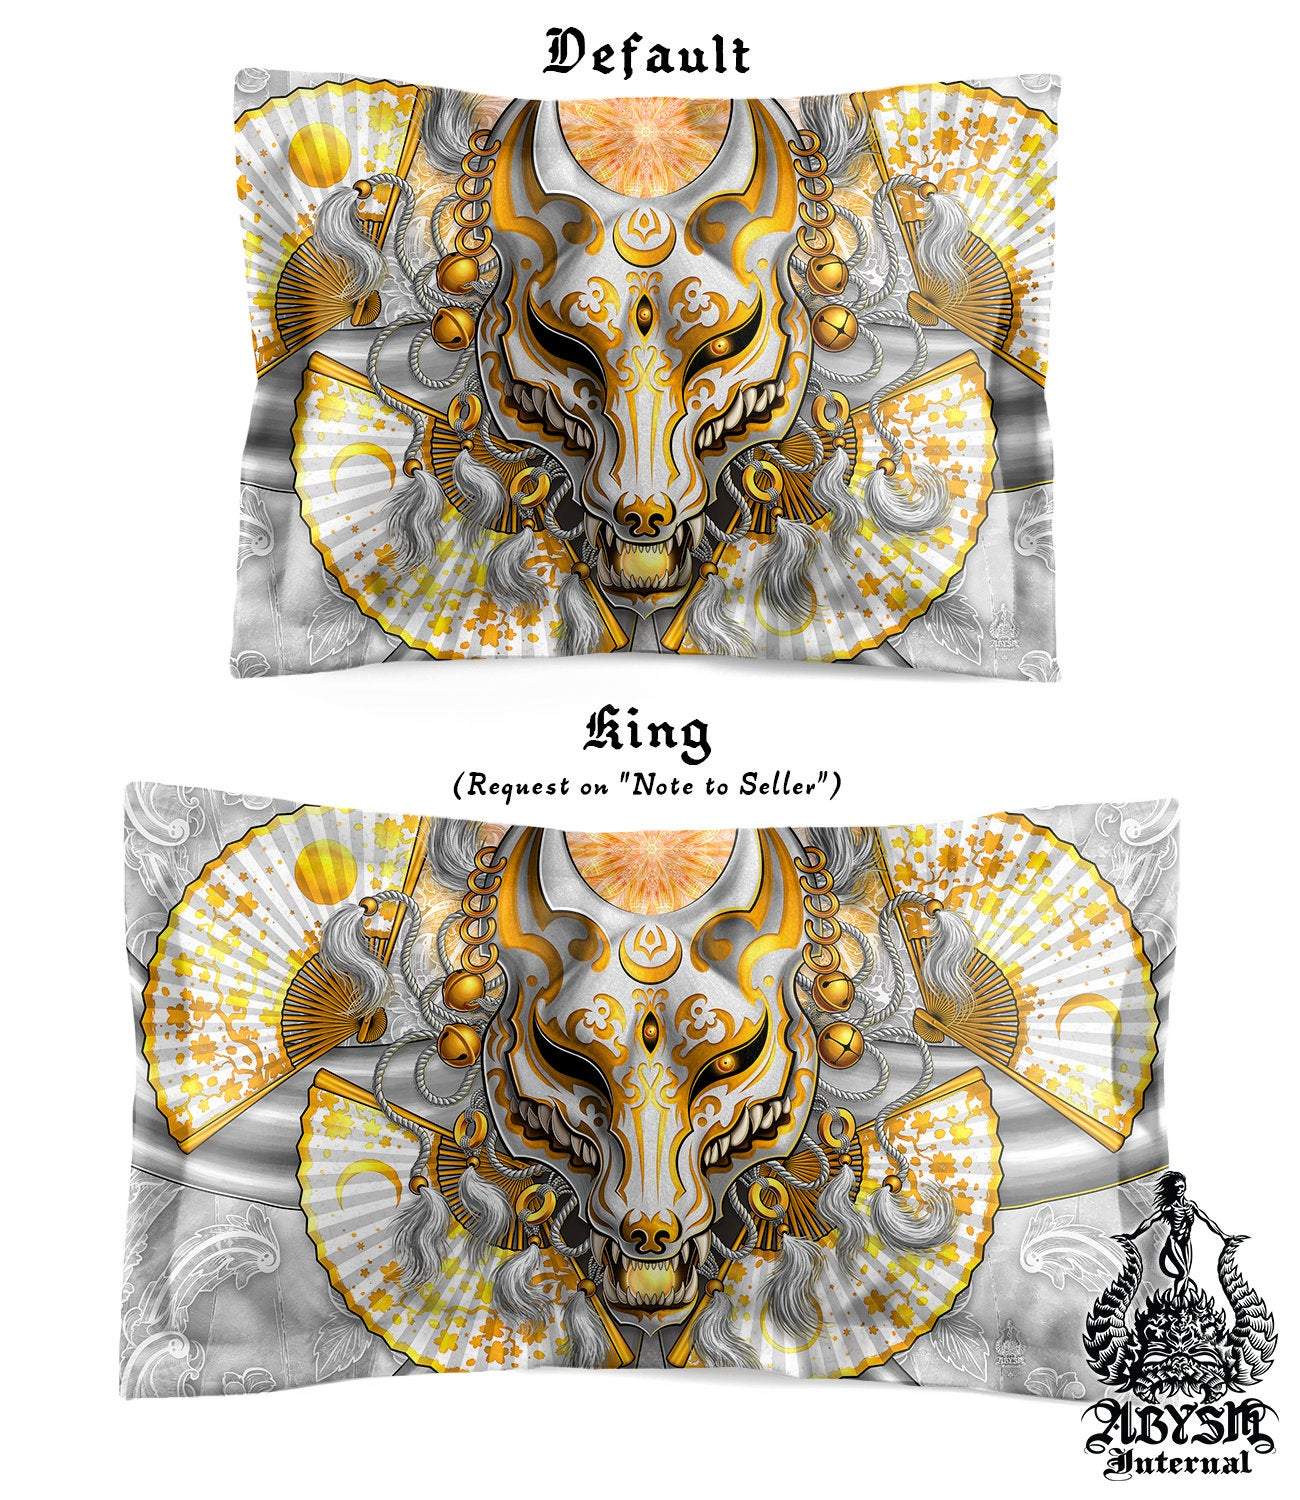 Kitsune Mask Bedding Set, Comforter and Duvet, Fox Okami and Anime Bed Cover and Bedroom Decor, King, Queen and Twin Size - White and Gold - Abysm Internal